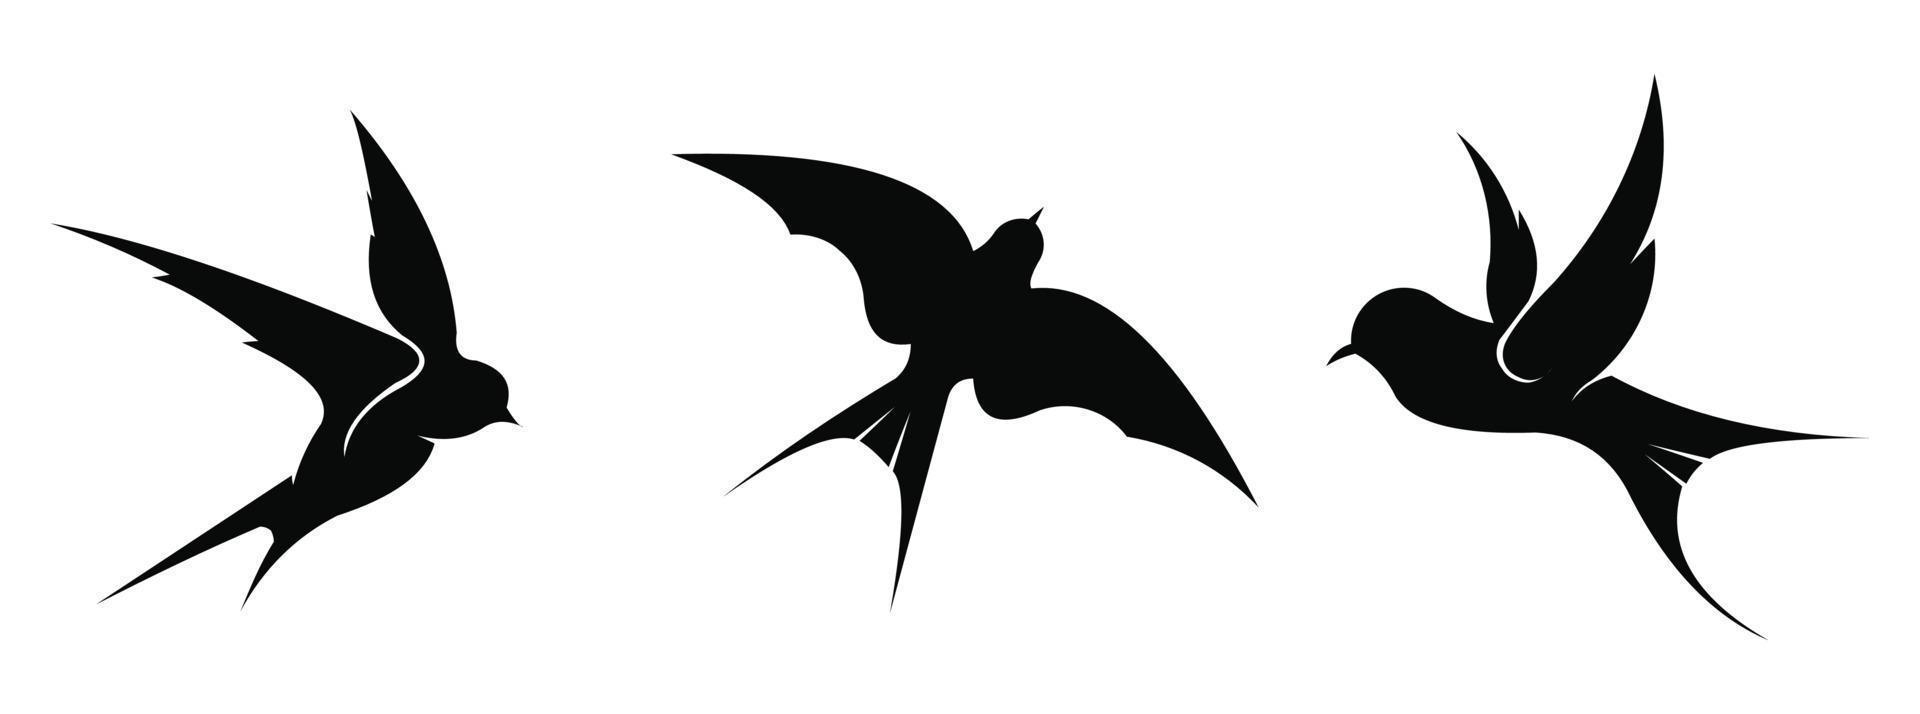 Flying birds silhouette on white background,spring bird or swift birds in sky crowd fly. vector